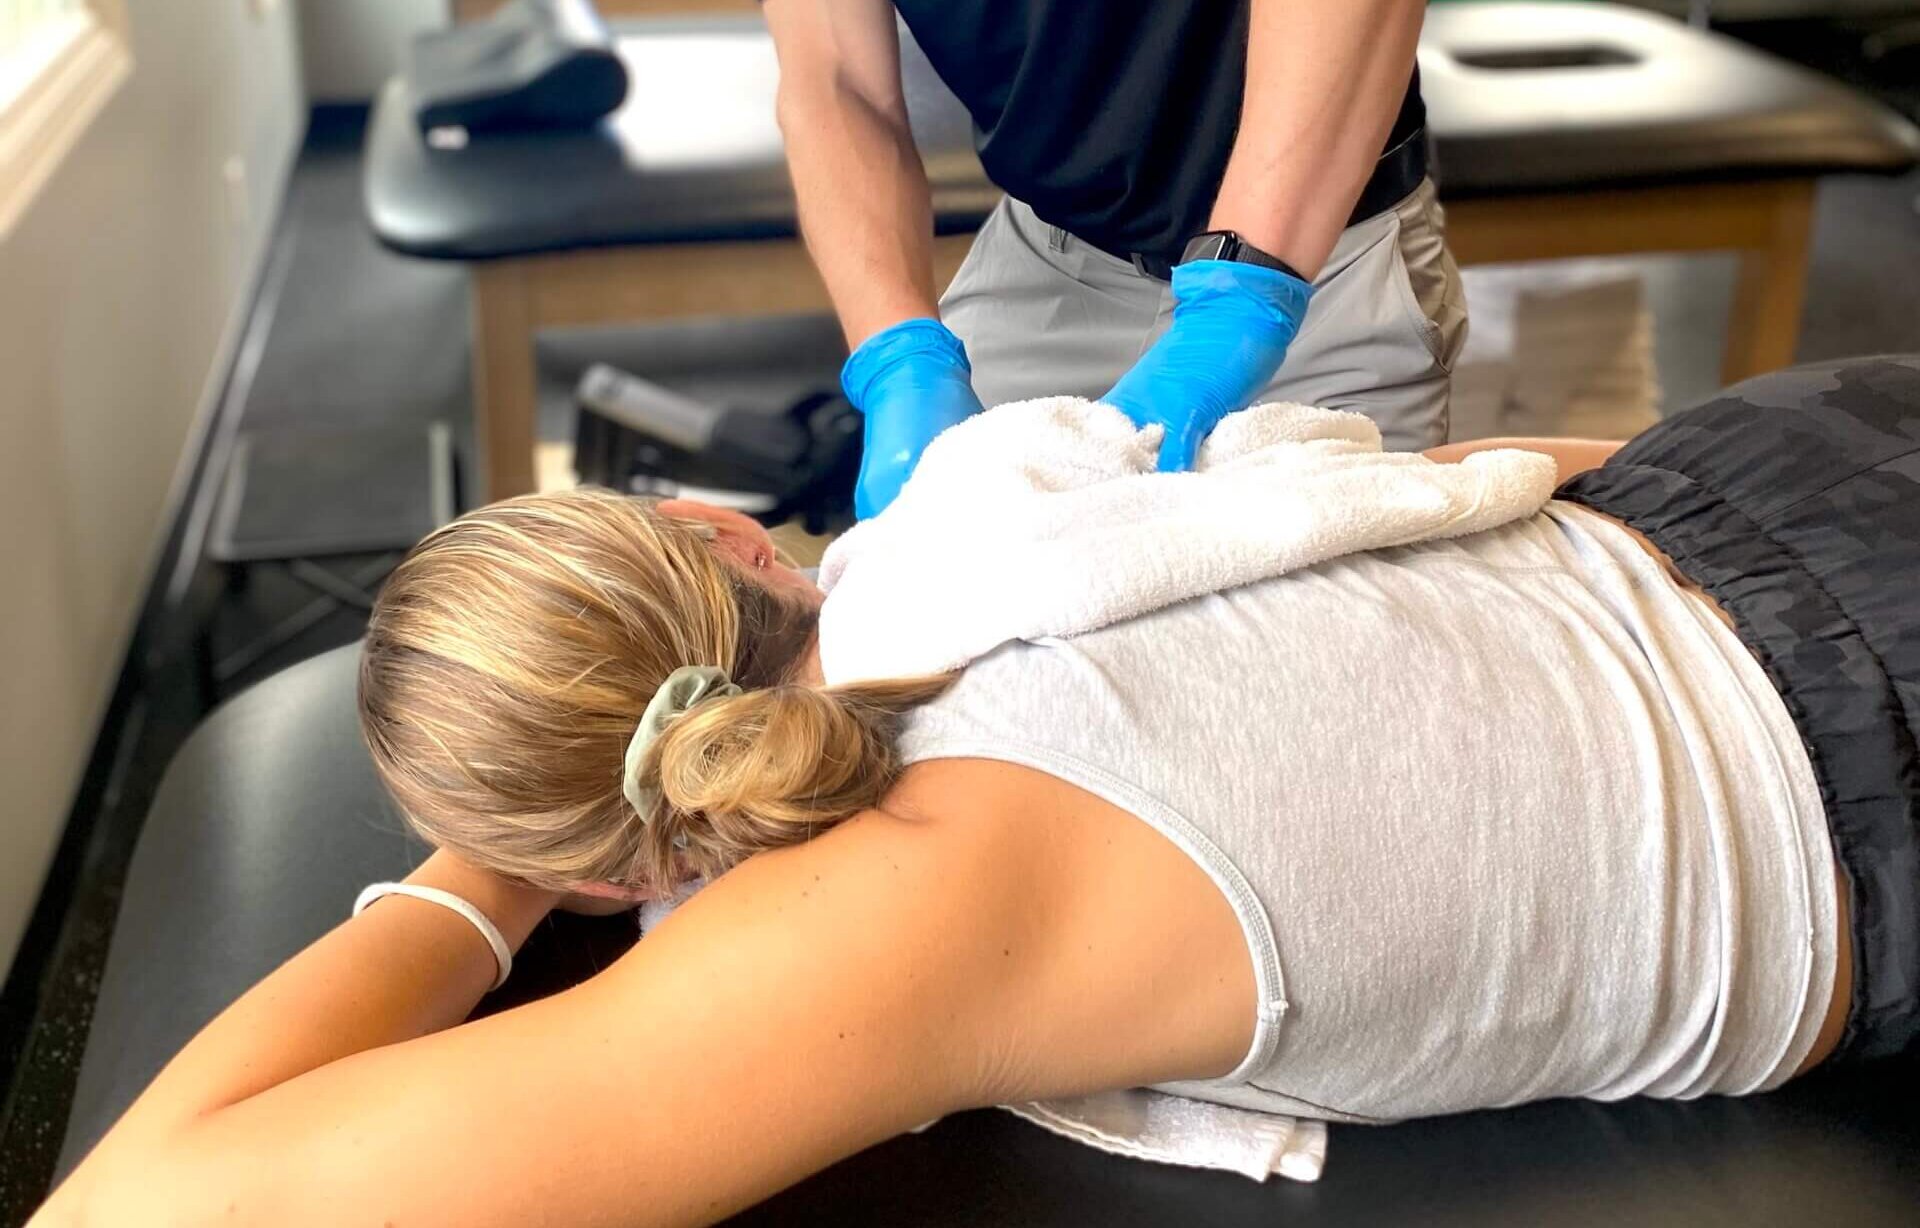 Soft-tissue Injury? Your Chiropractor Can Reduce Pain, Improve Function